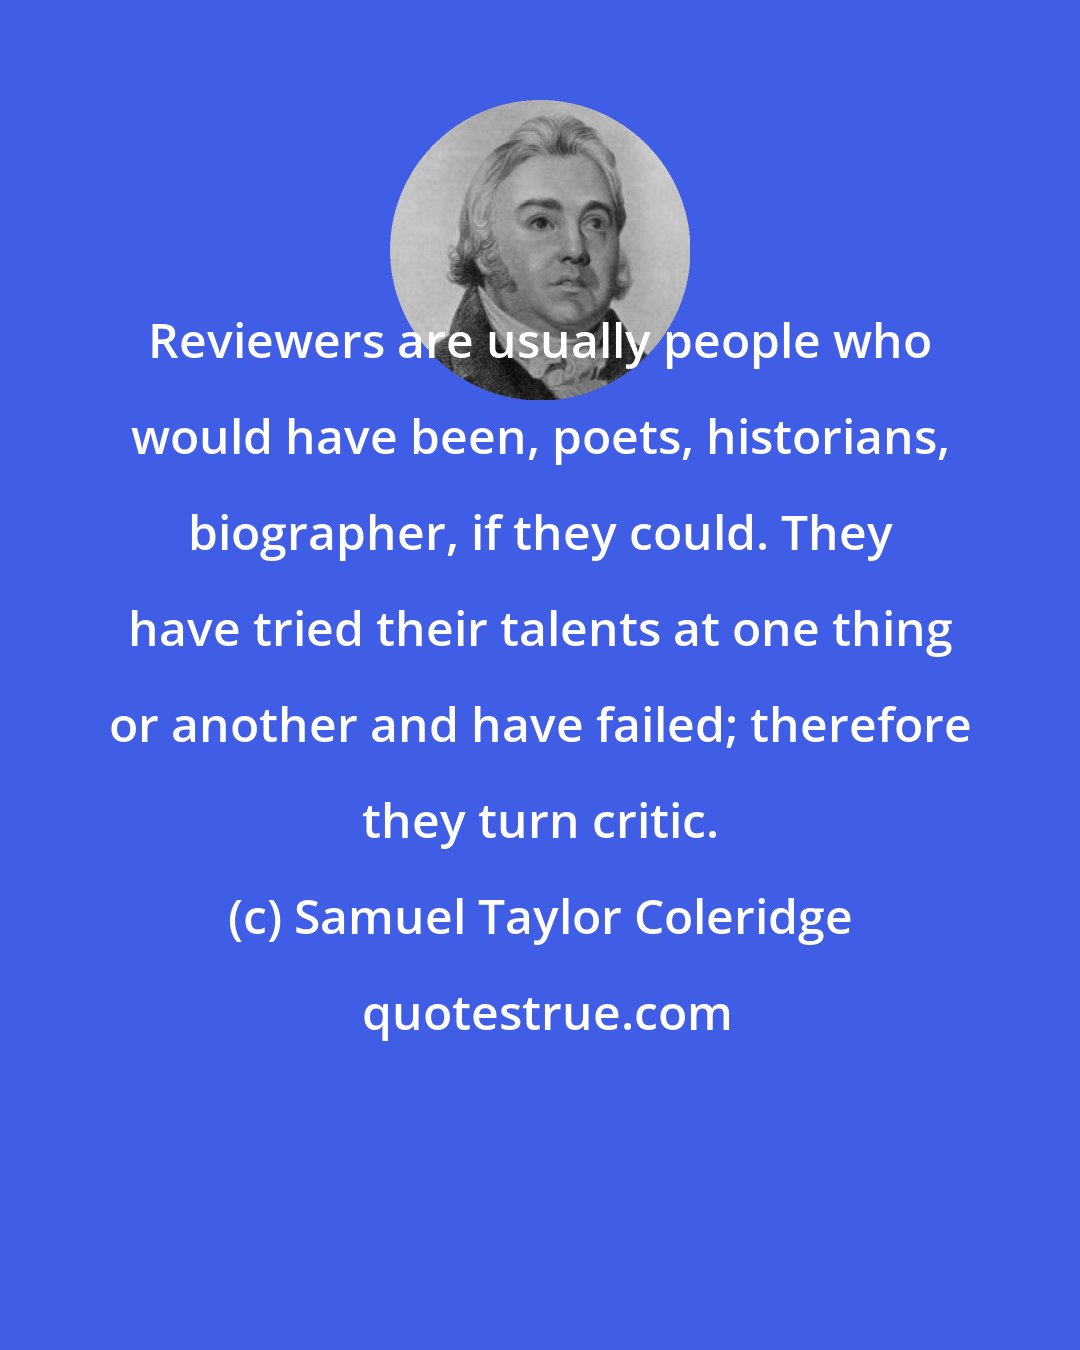 Samuel Taylor Coleridge: Reviewers are usually people who would have been, poets, historians, biographer, if they could. They have tried their talents at one thing or another and have failed; therefore they turn critic.